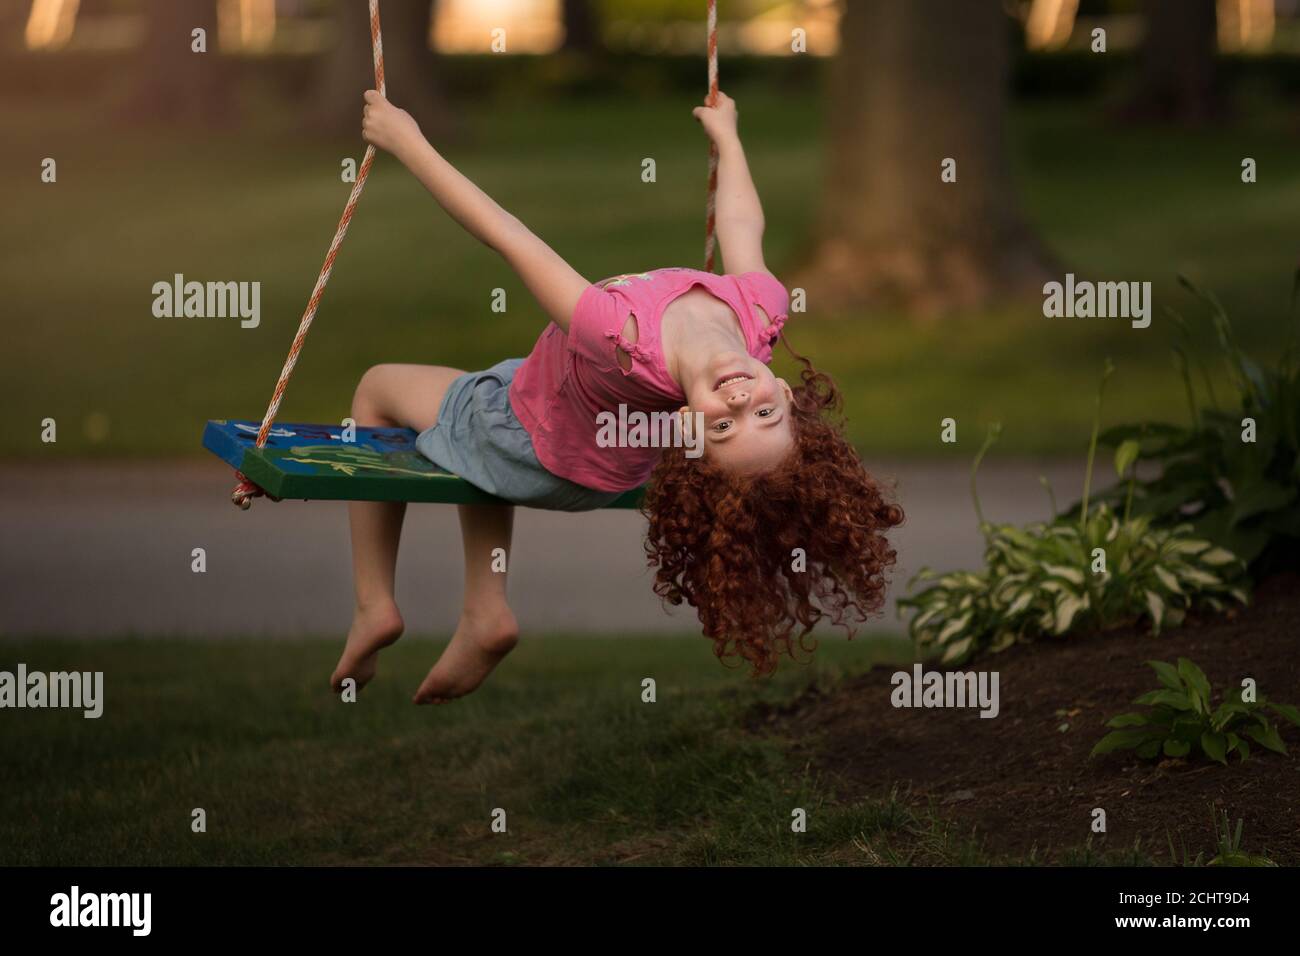 Young red headed girl hanging upside on a tree swing Stock Photo